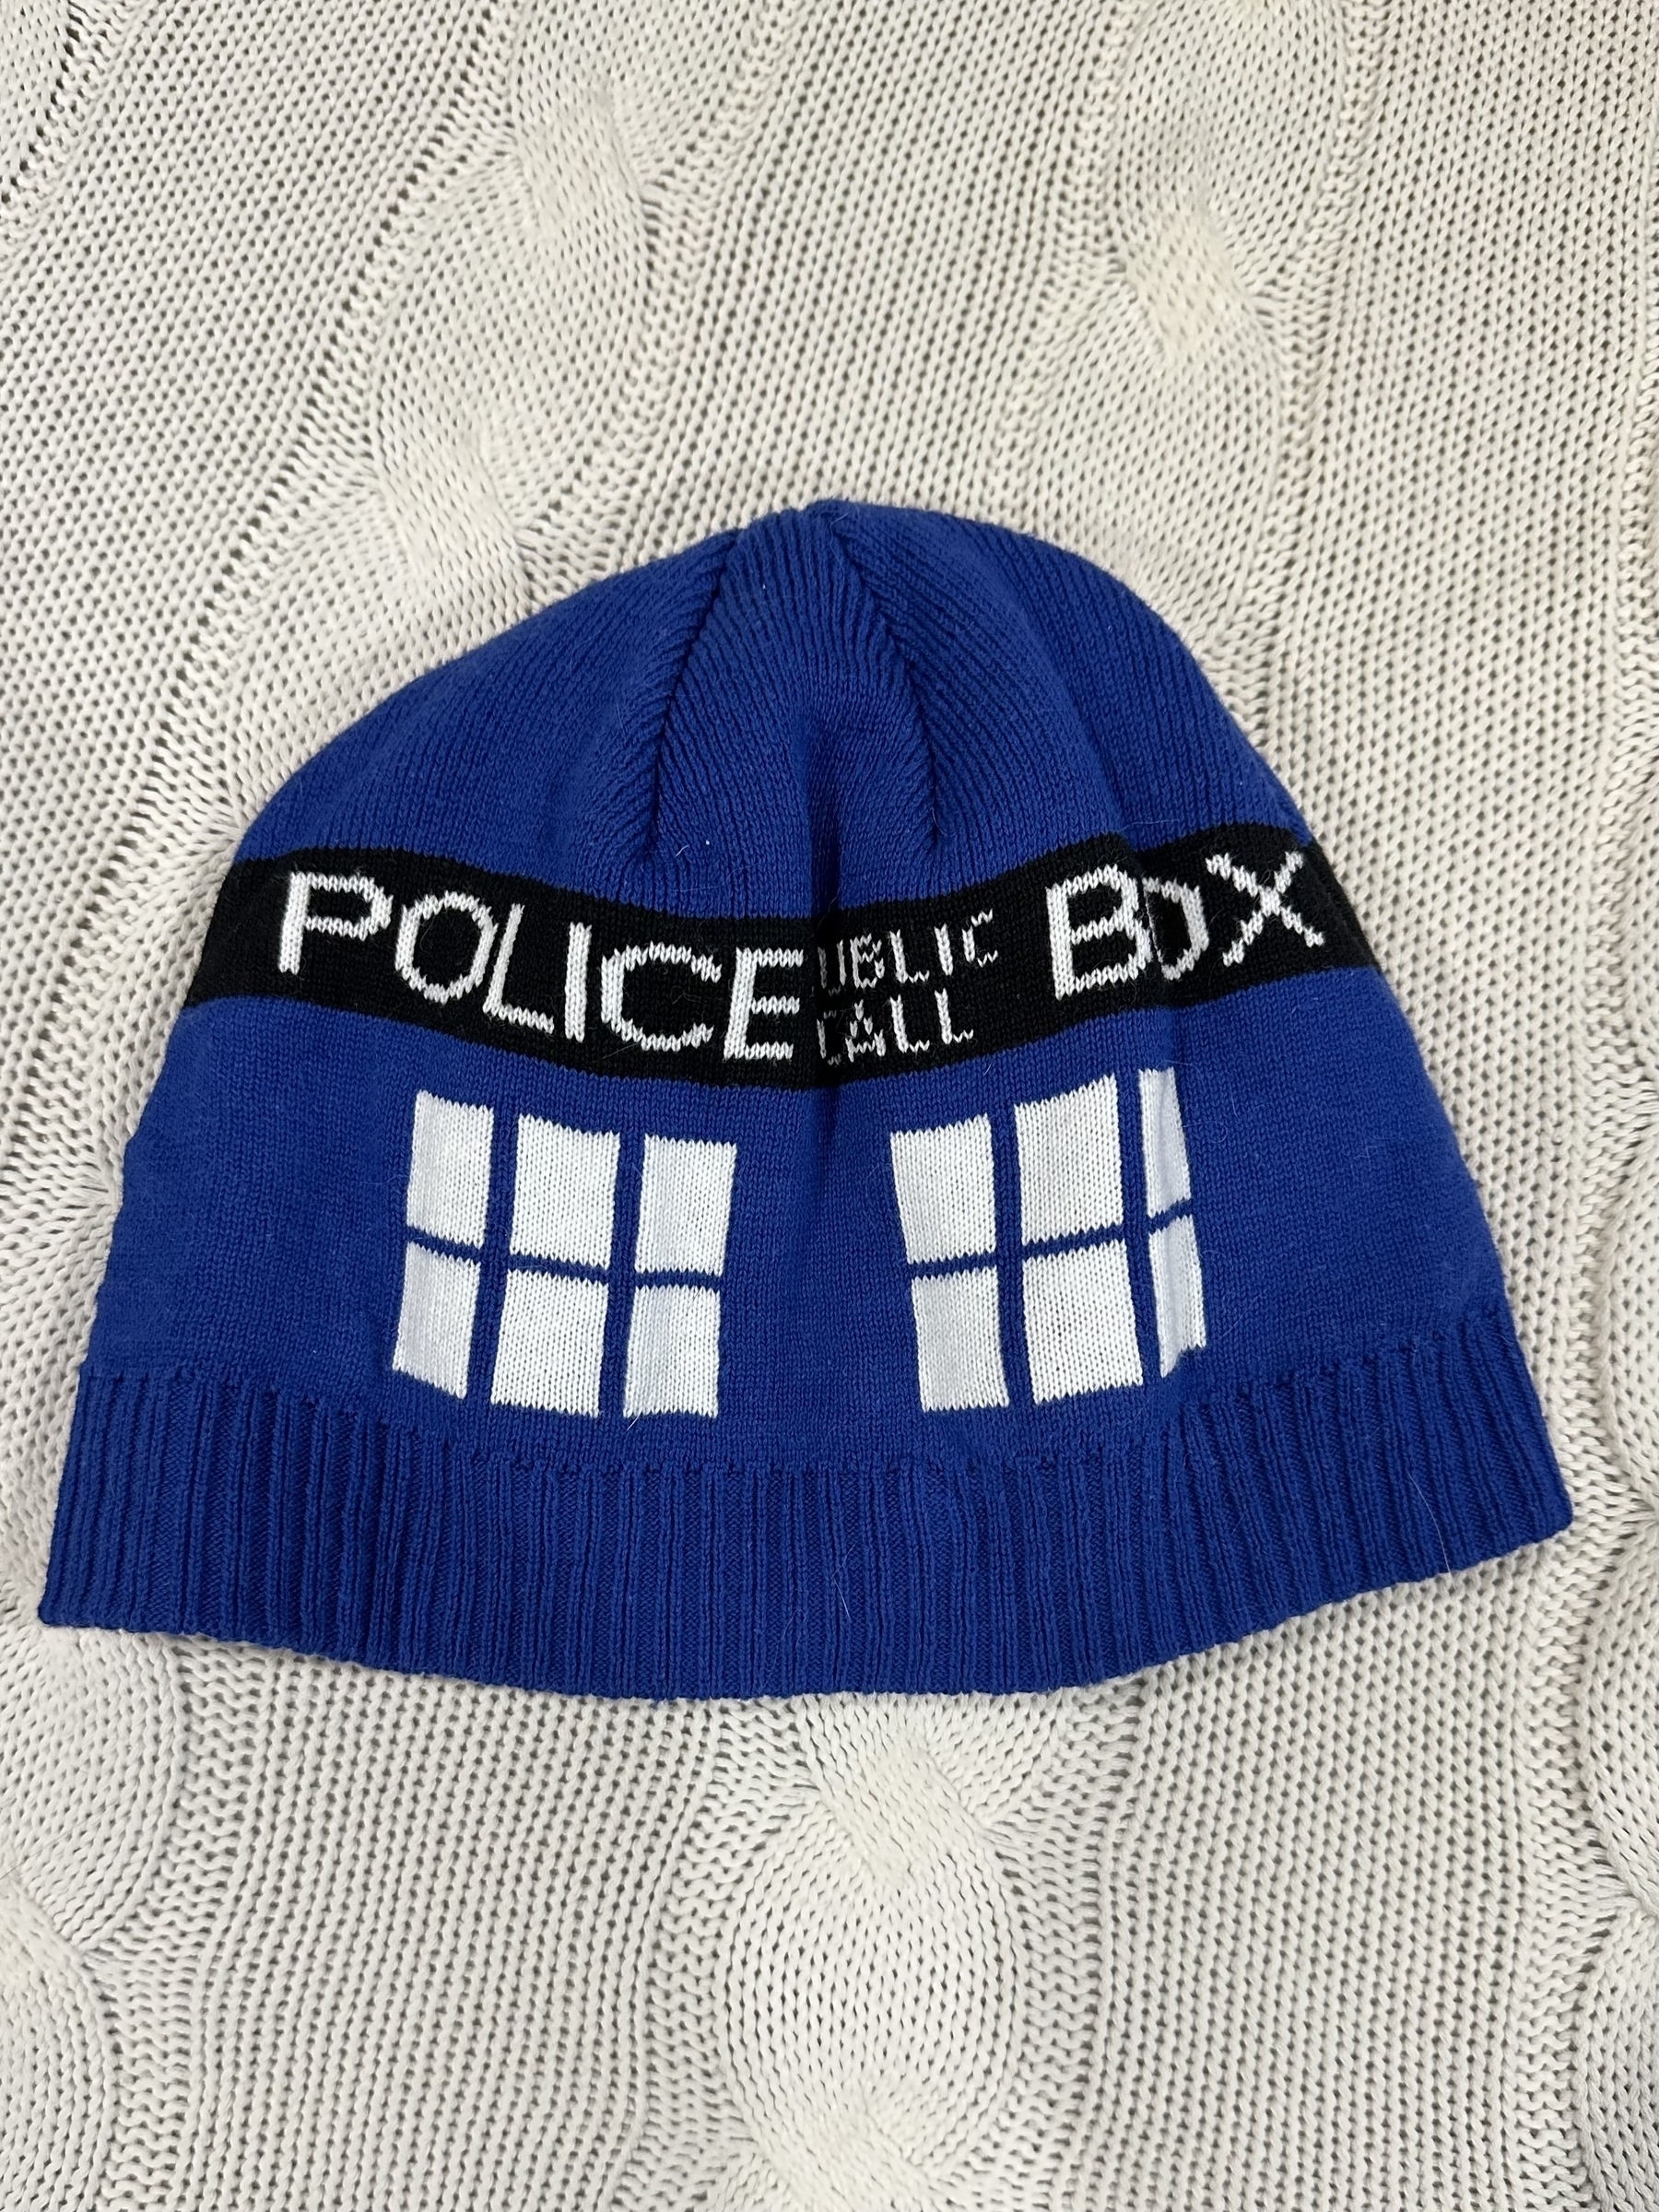 A blue beanie resembling the TARDIS from Doctor Who. A black band has “Police Box” “public call” in white capital letters inside. Underneath are white squares in two 3x2 grids representing the windows.